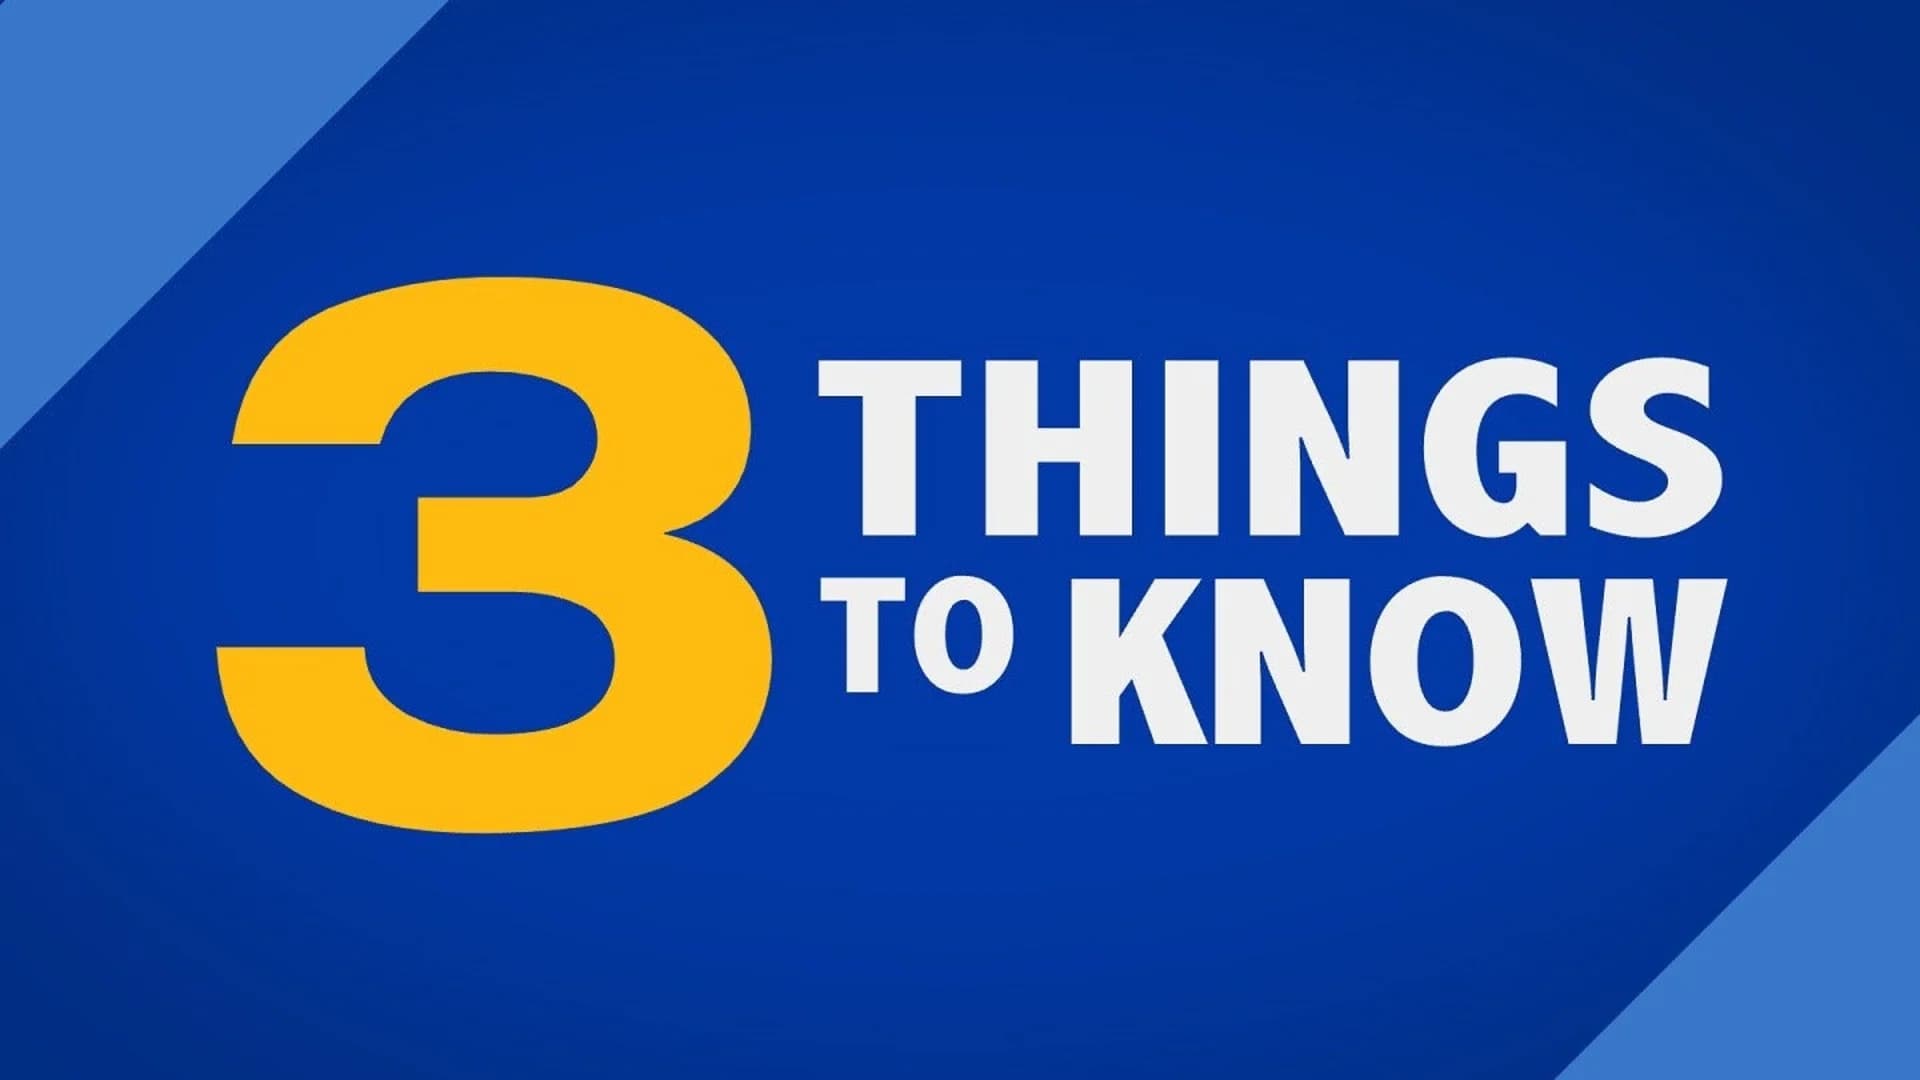 3 Things to Know: July 11, 2018